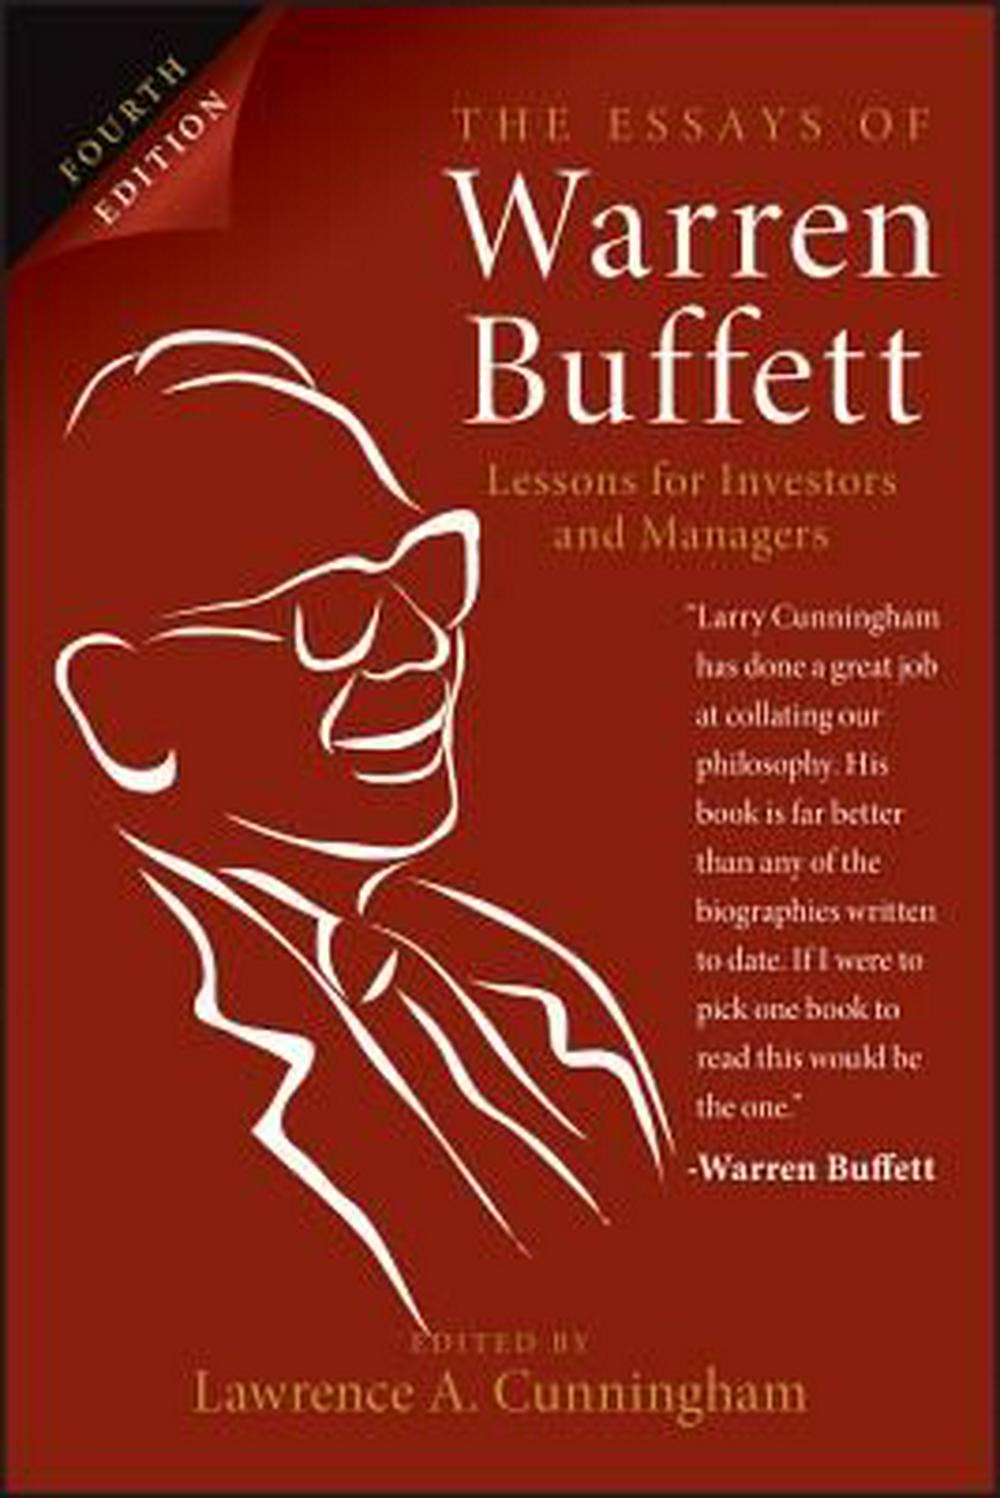 The Essays of Warren Buffett Lessons for - Monitor Investimentos